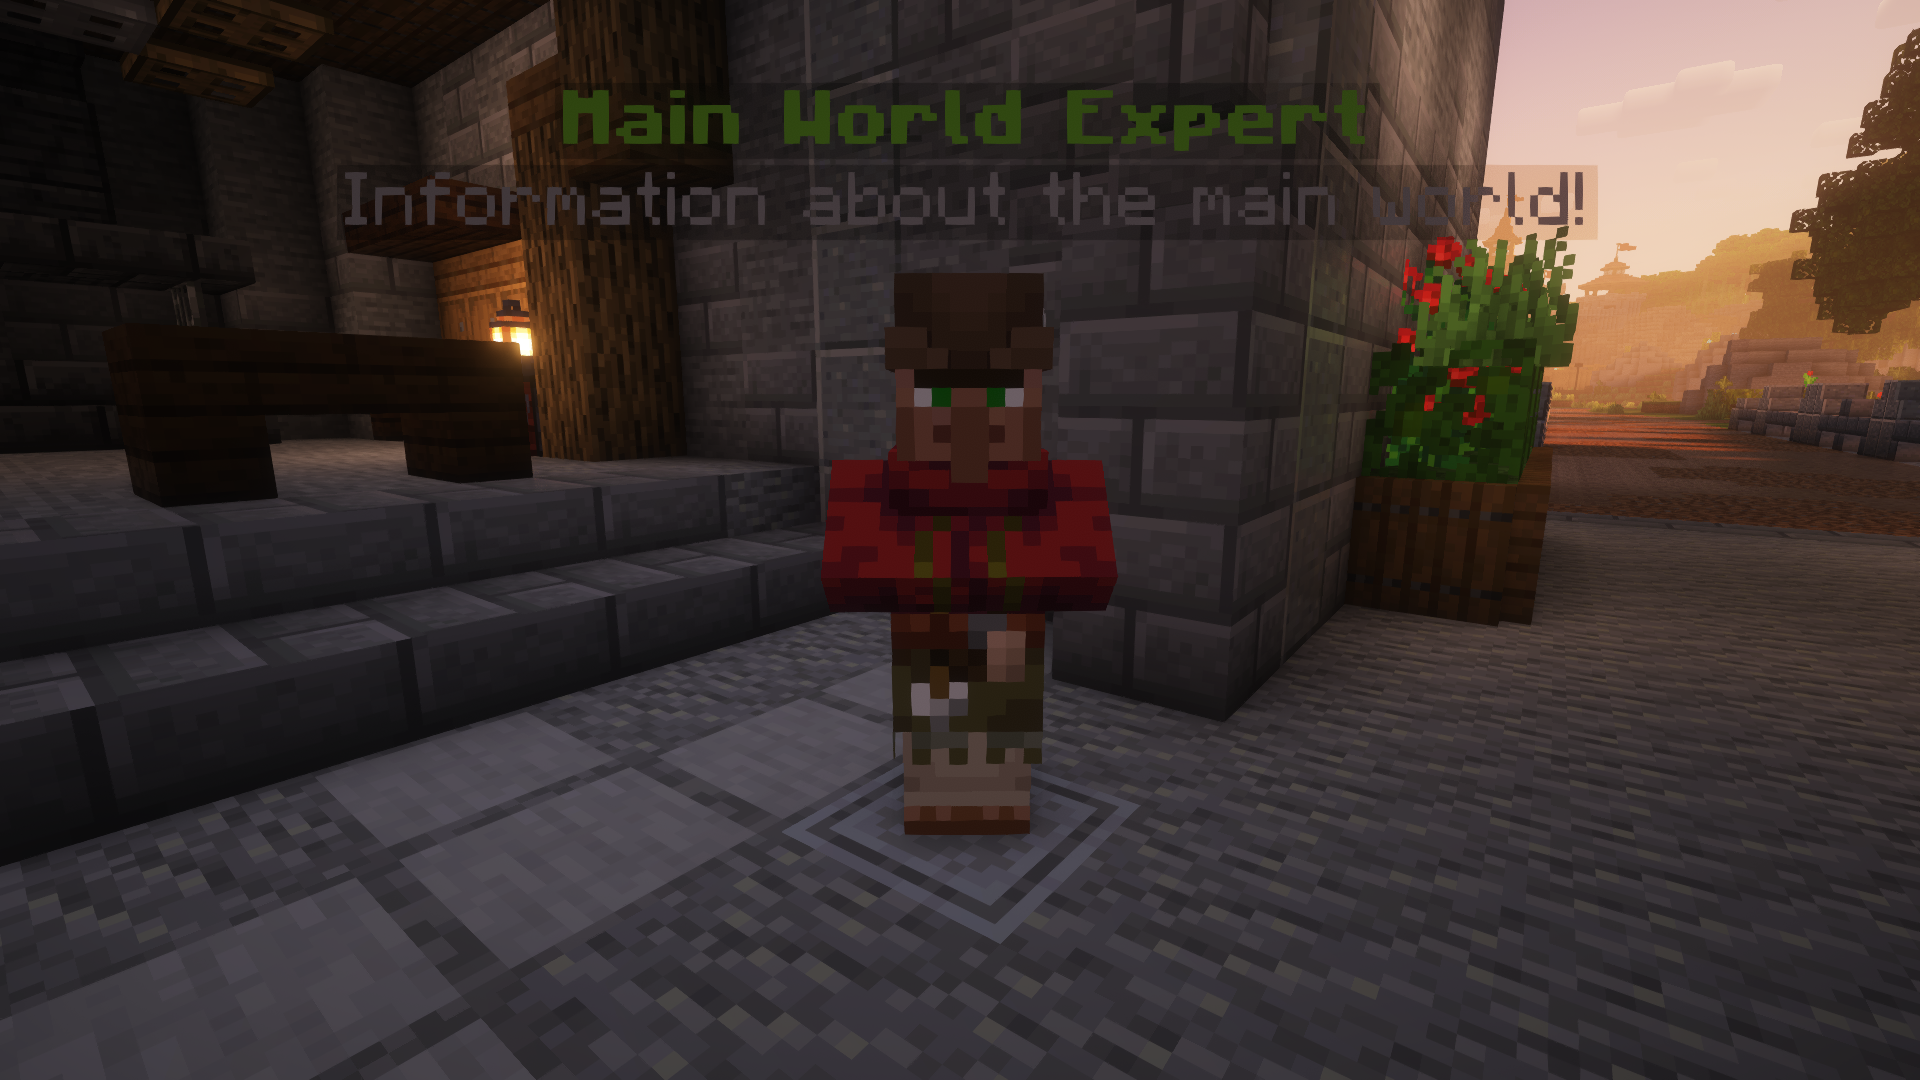 A Minecraft villager that is called "Main World Expert" and is at the position of the ConfigPosition.